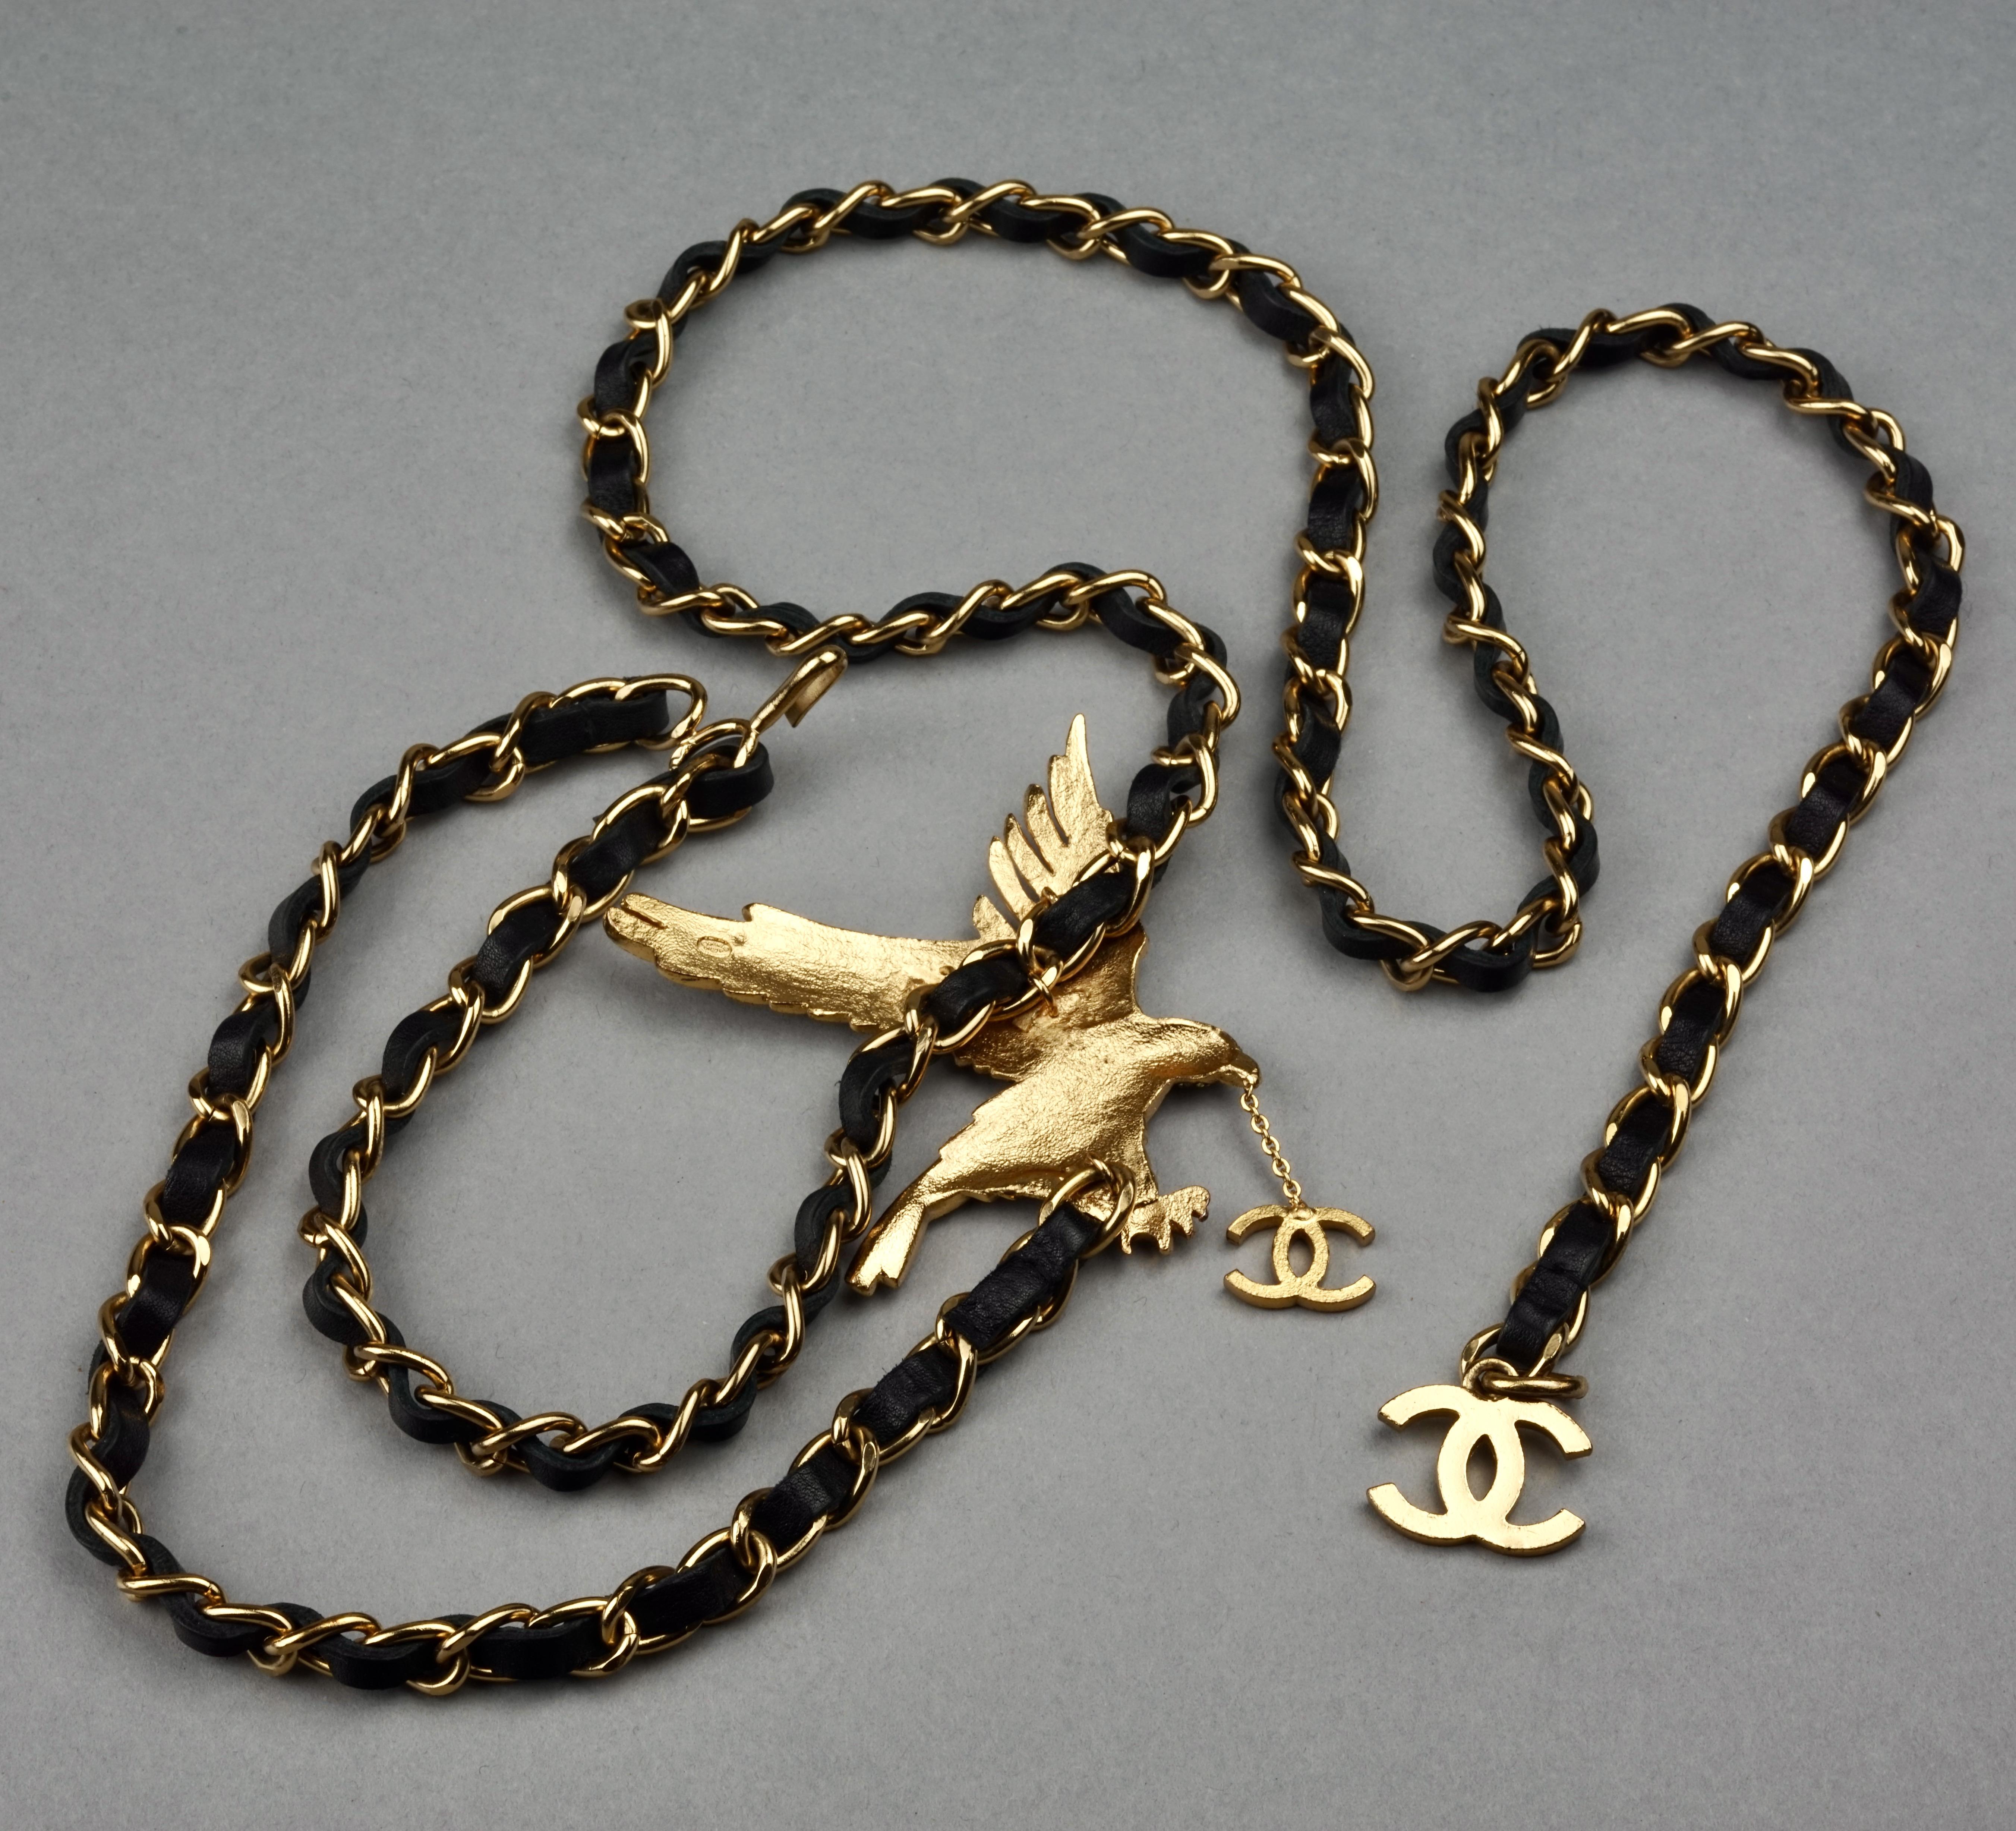 Vintage CHANEL Jeweled Eagle Chain Leather Necklace Belt 8